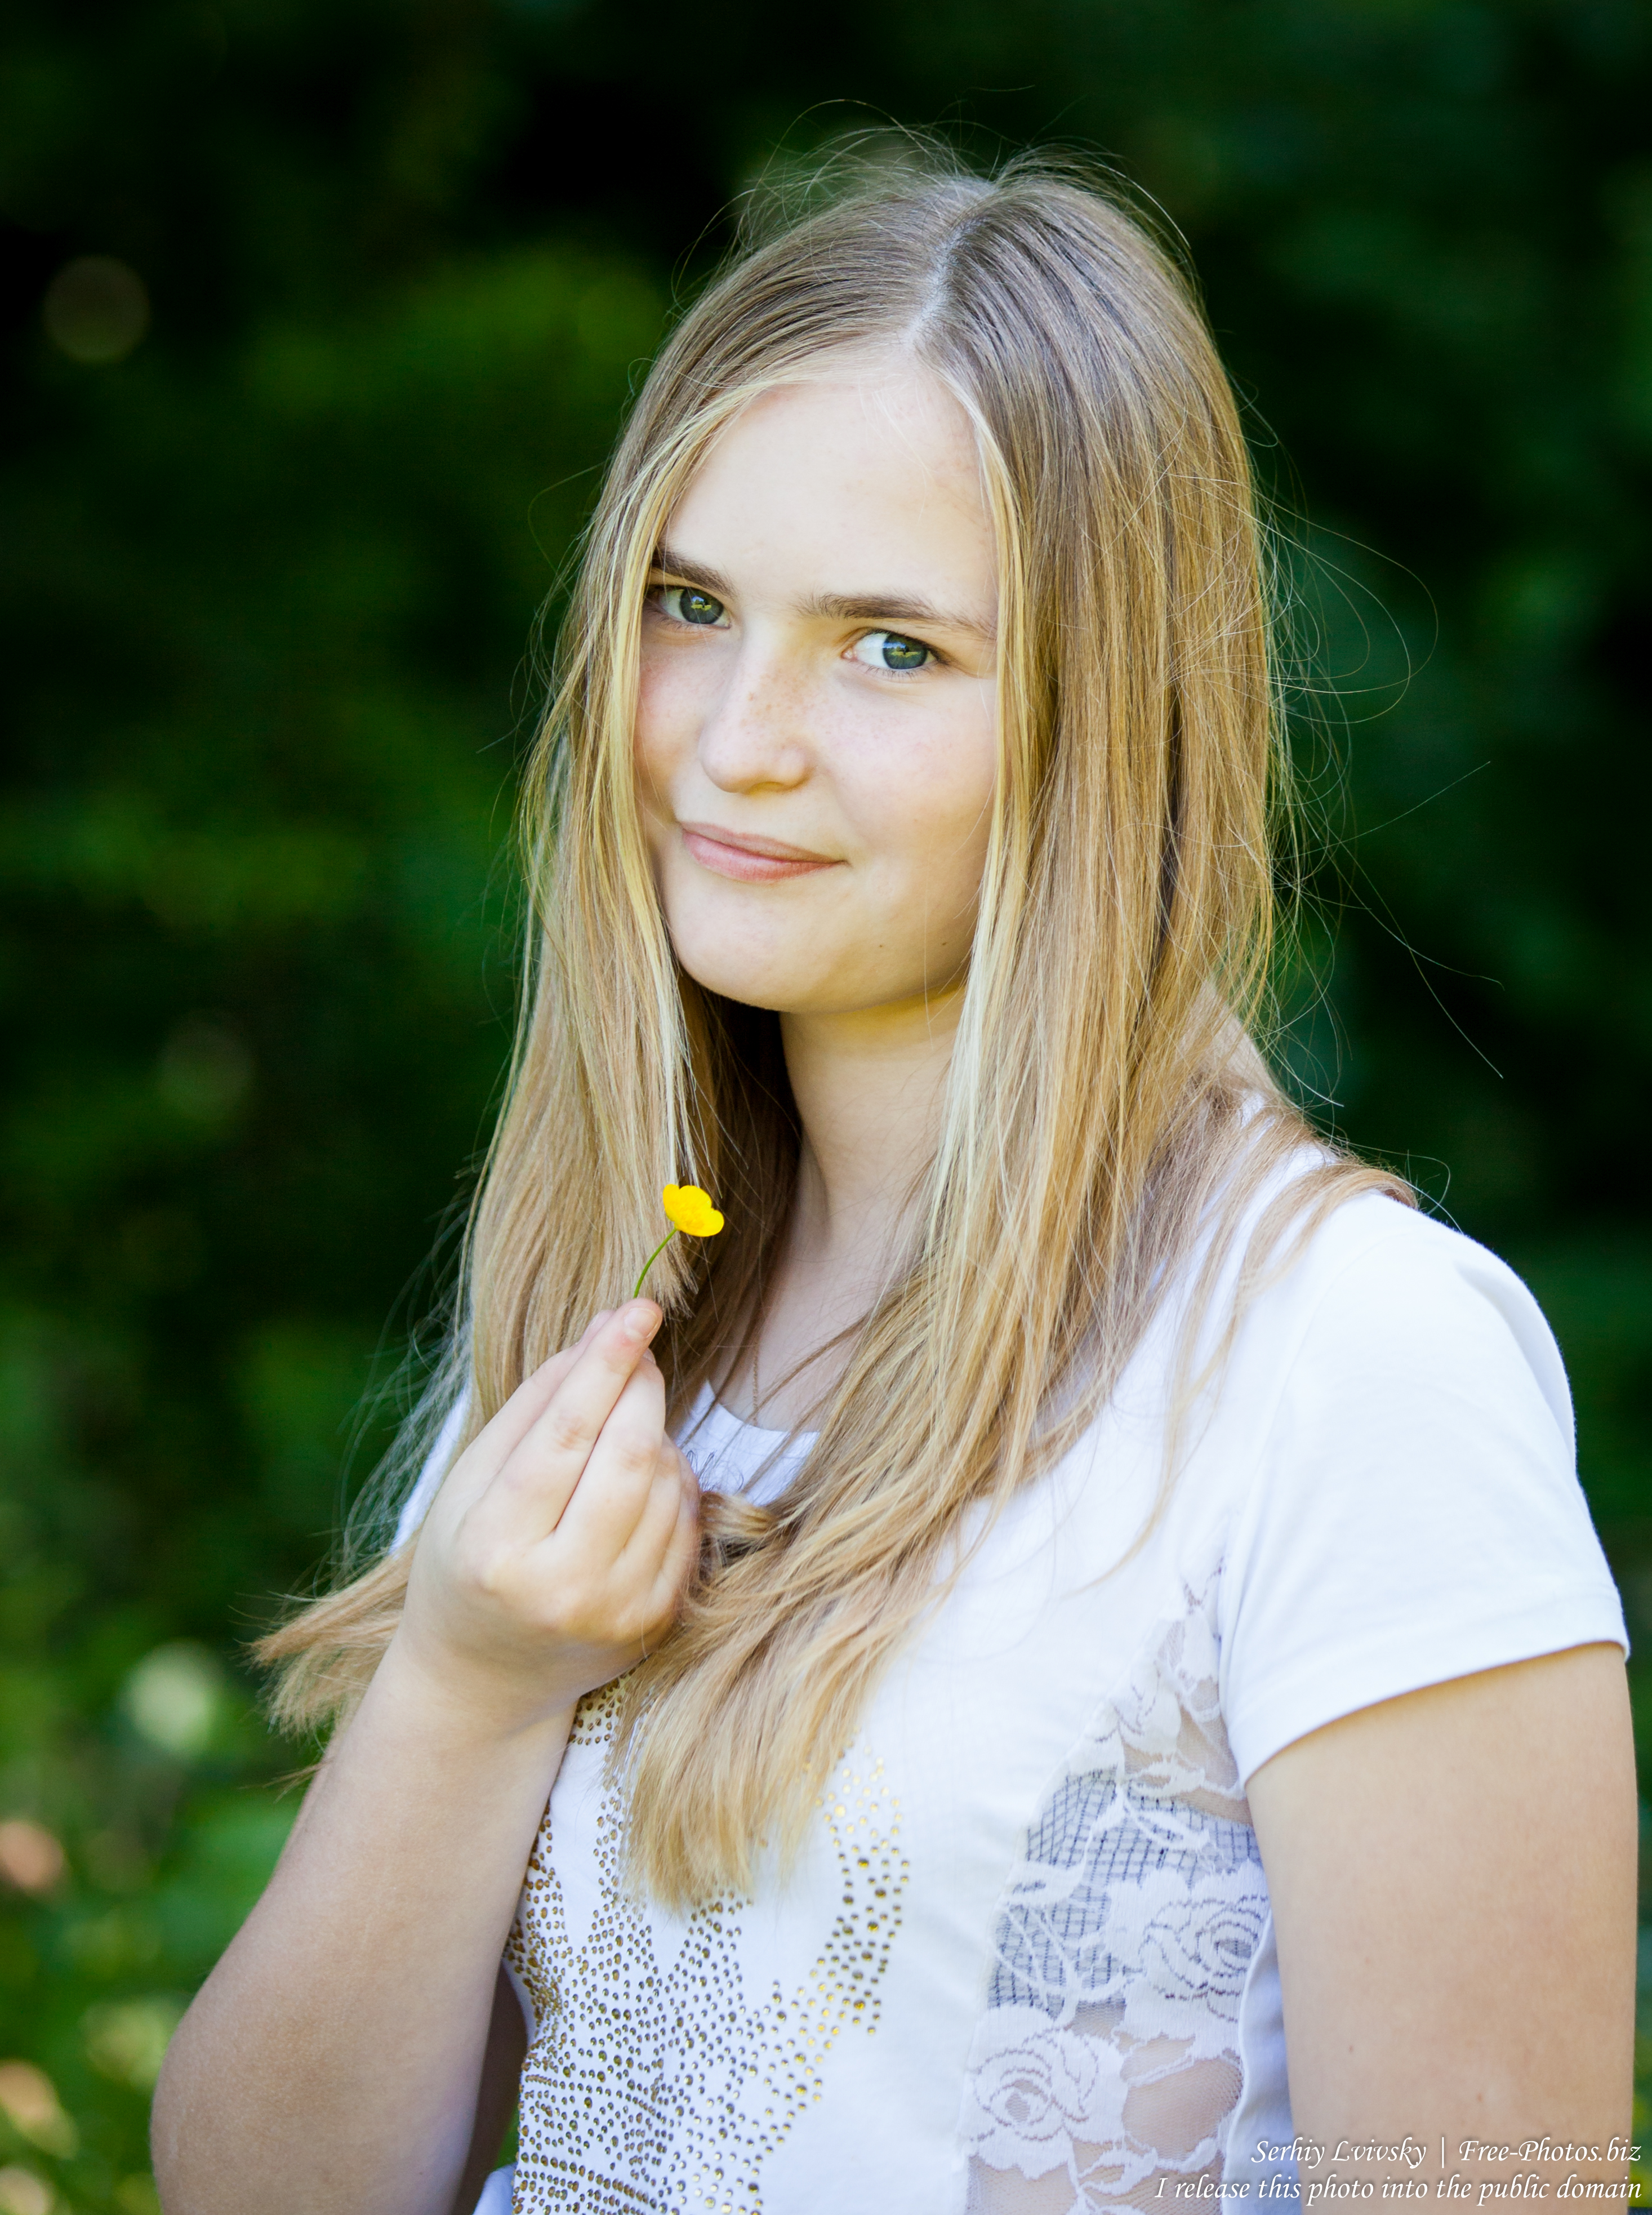 a 14-year old fair-haired girl photographed in June 2015, picture 8